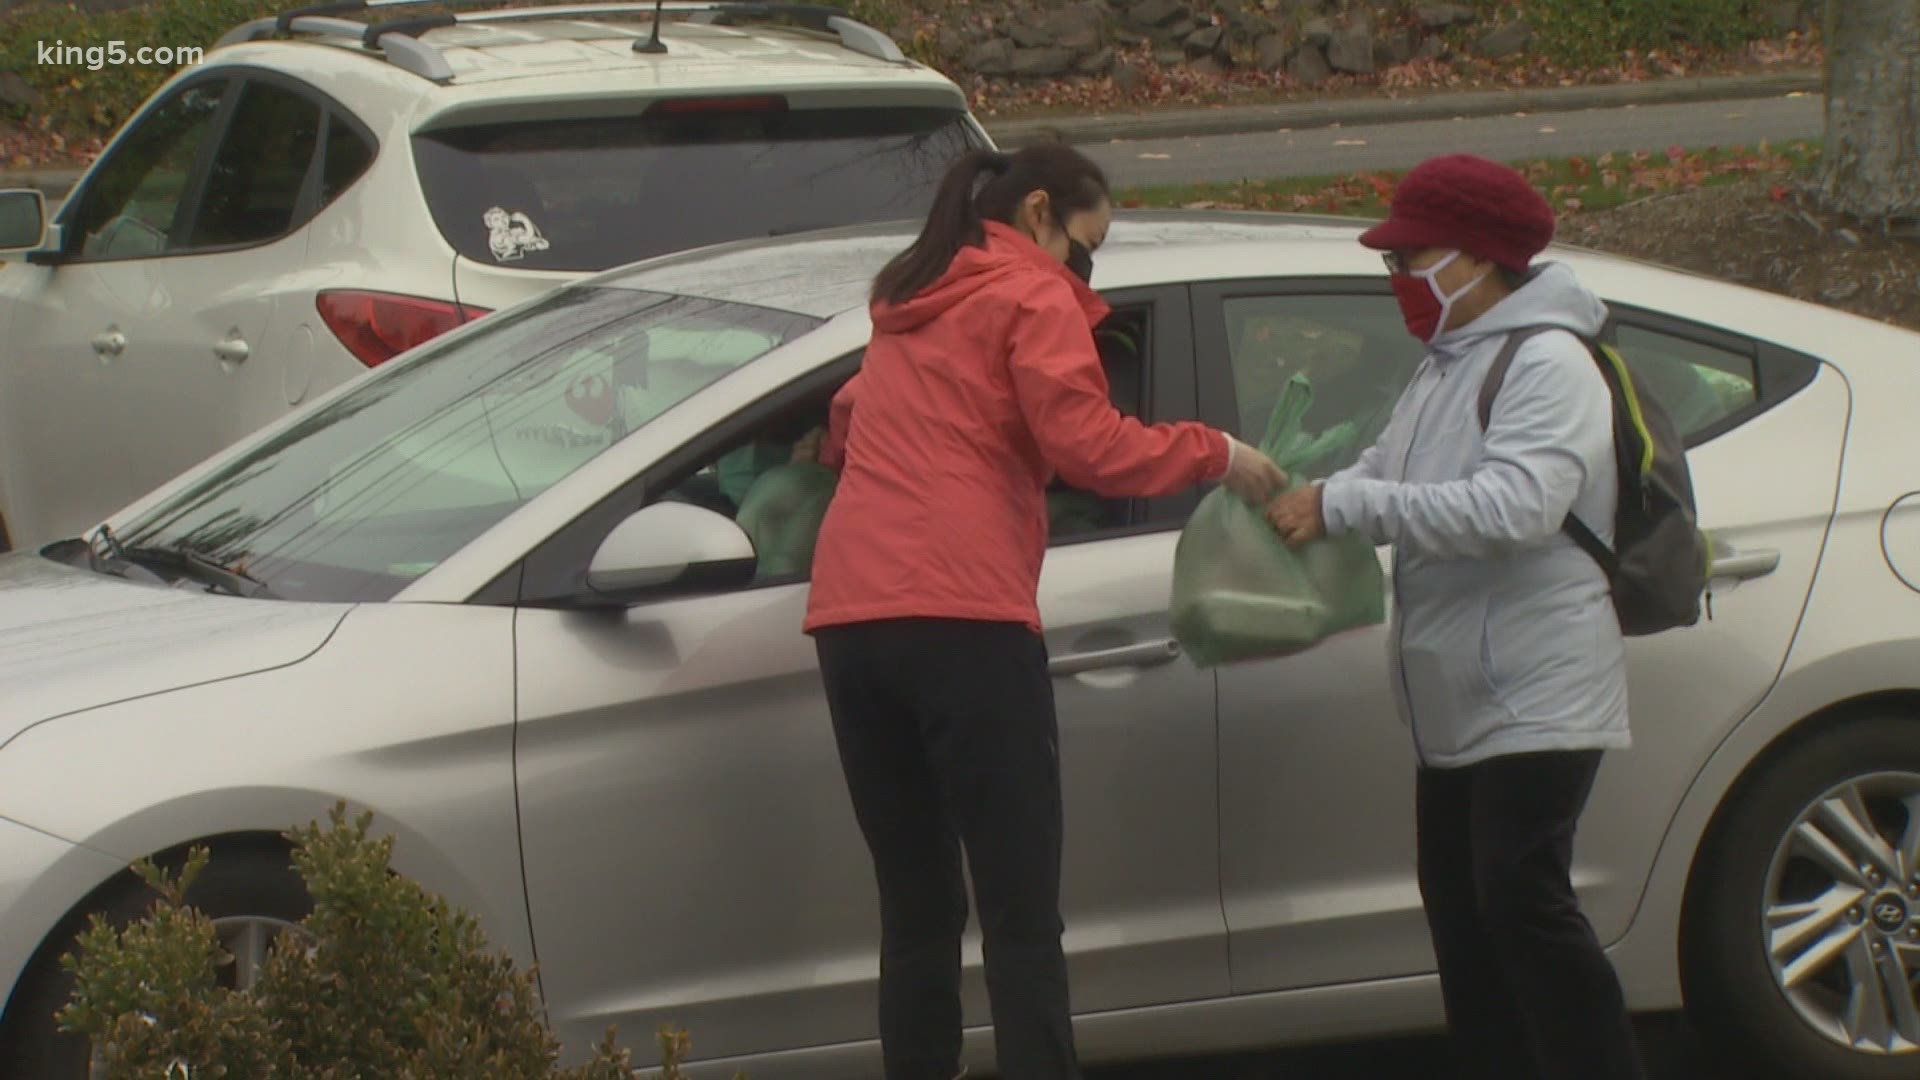 The number of meals served by the Meals on Wheels program has increased 216% since the start of the COVID-19 pandemic in Snohomish County alone.